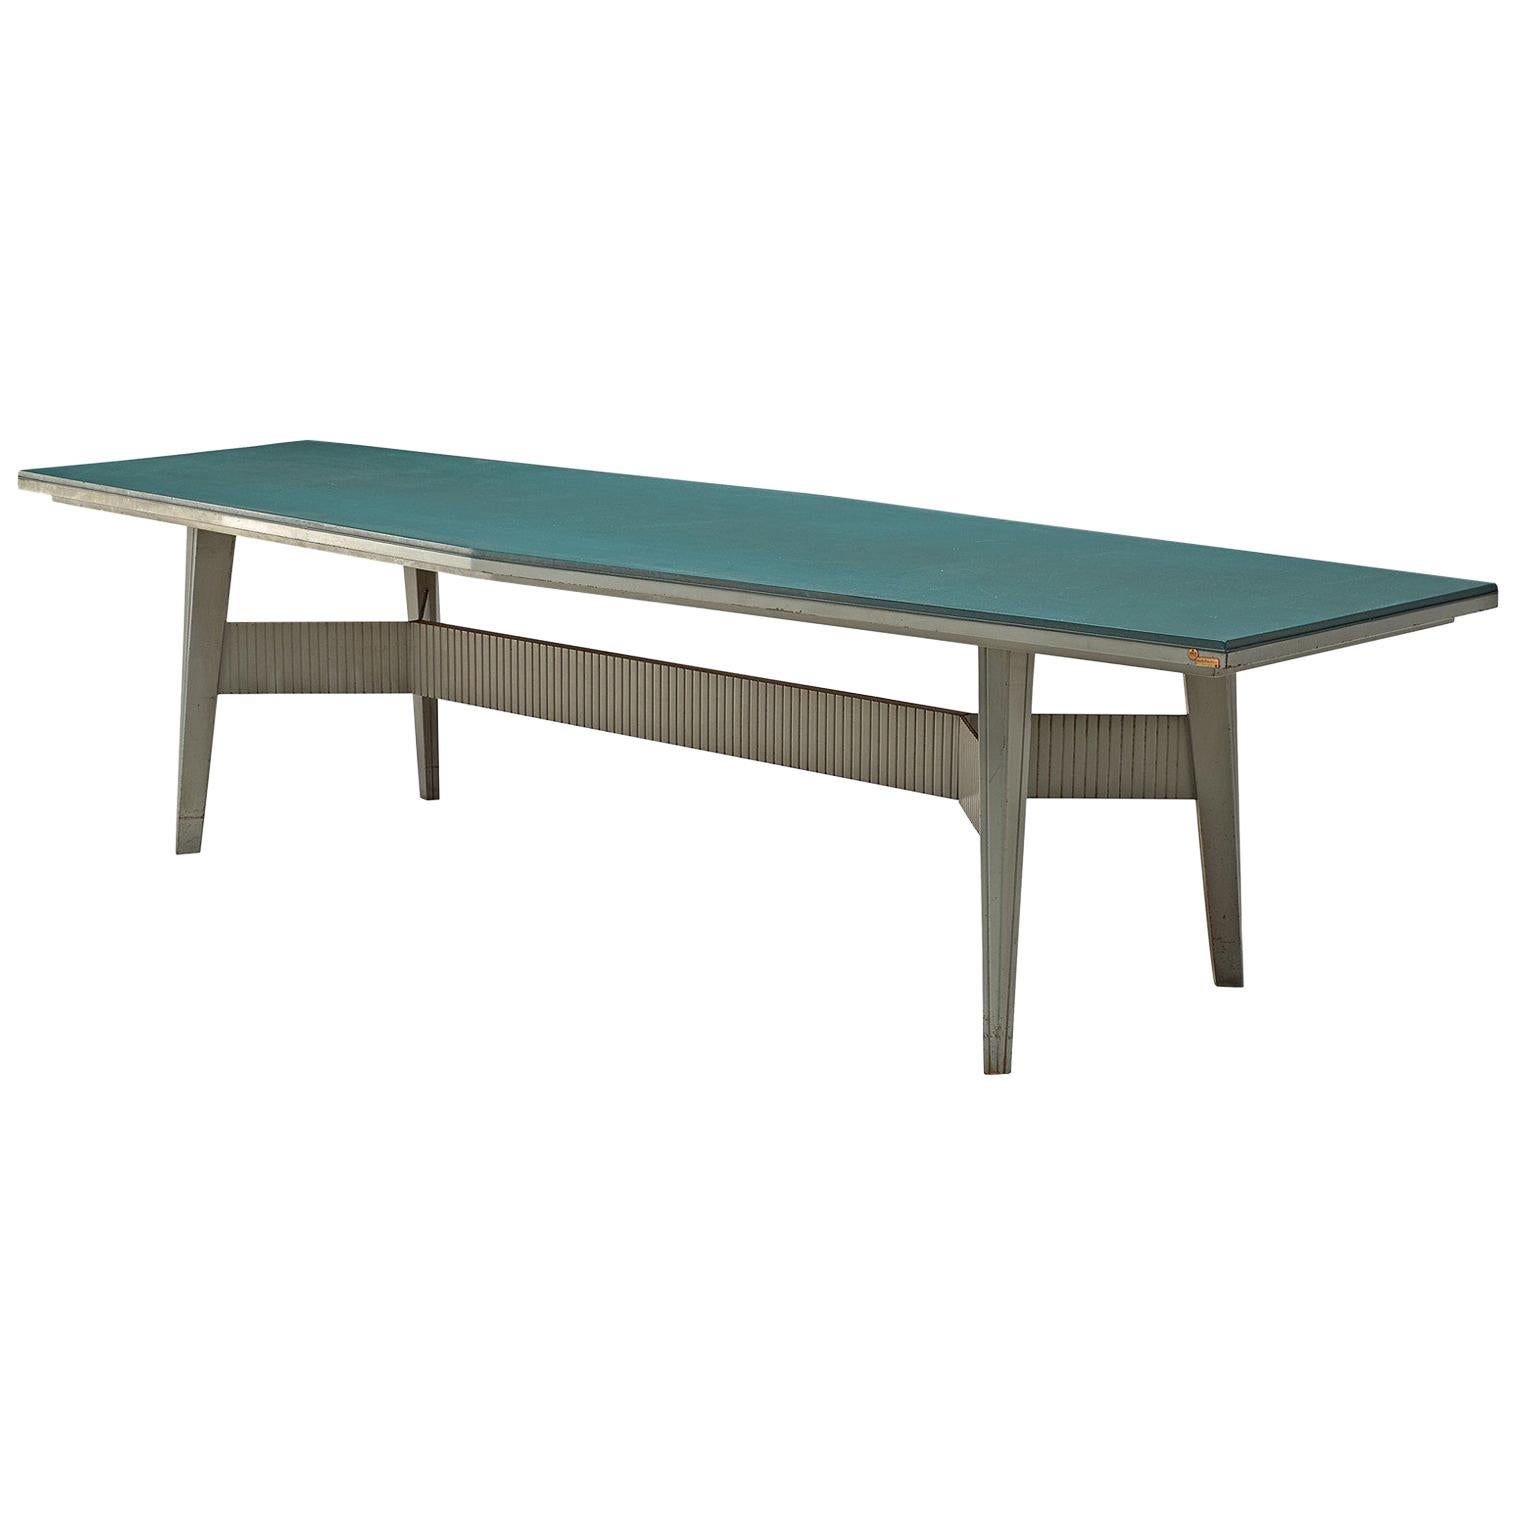 Italian Mobiltecnica Metal Work Table with Leatherette Top